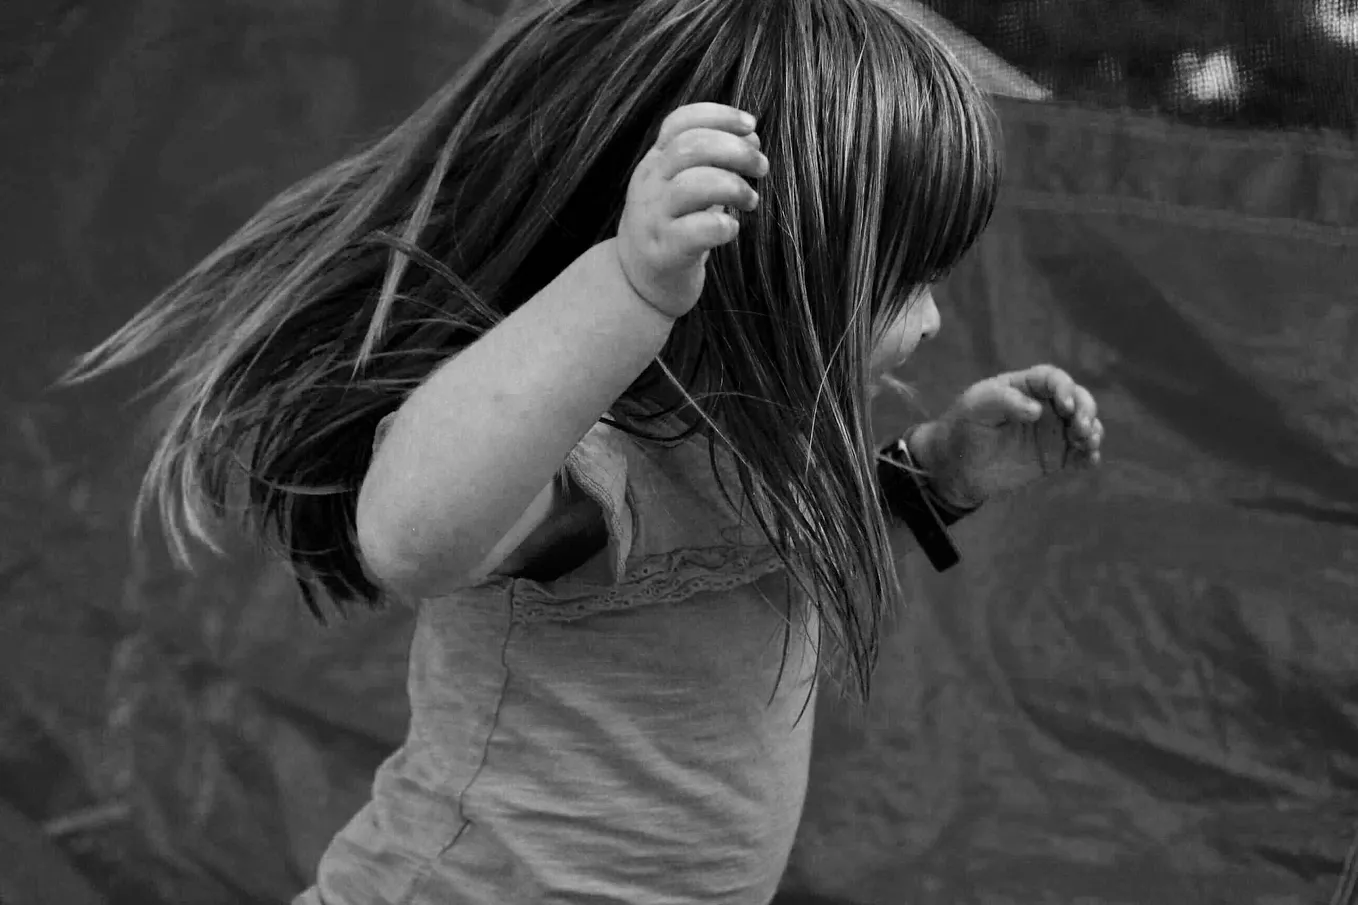 A photo of a little girl shows her in motion, runing and possibly twirling happily as she plays.